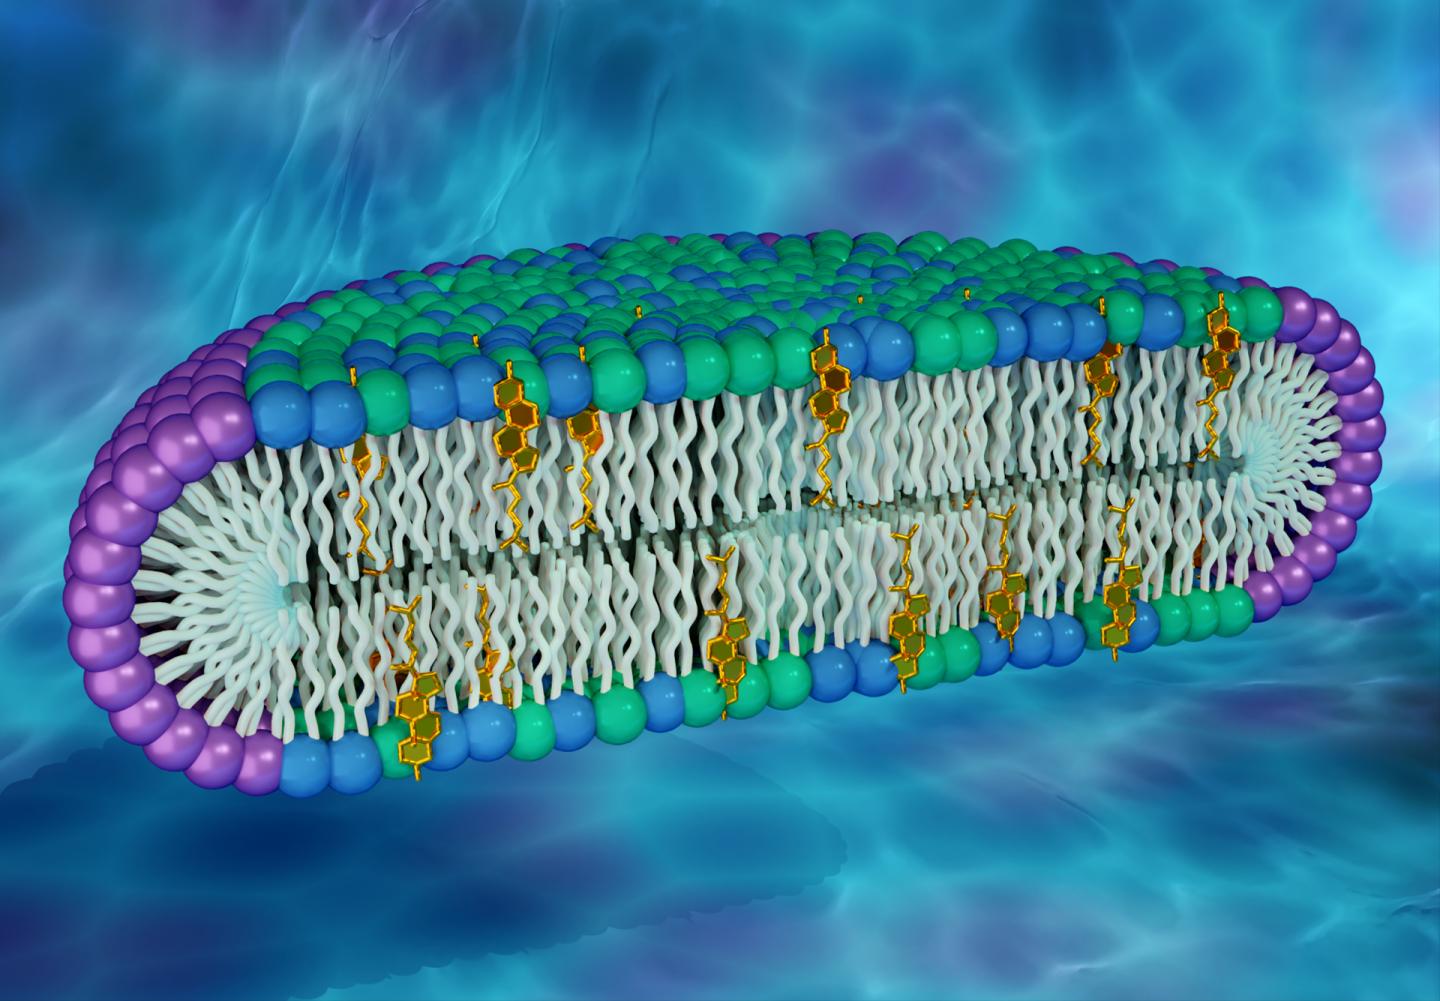 Novel Cell Membrane Model Could Be Key to Uncovering New Protein Properties